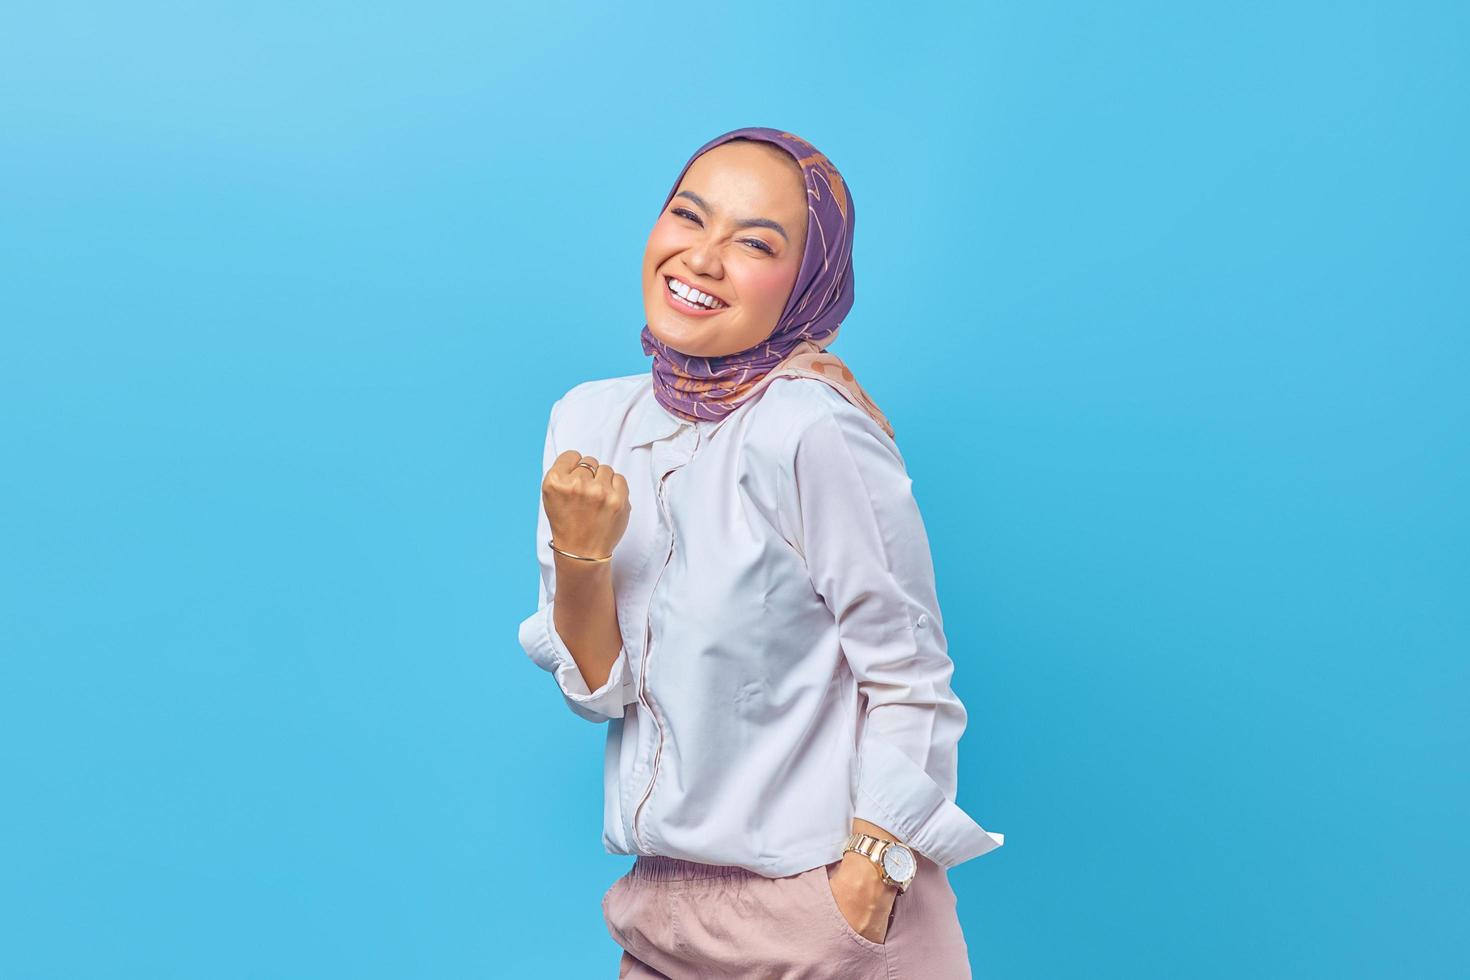 Cheerful young Asian woman raising her fist with smiling face happy photo